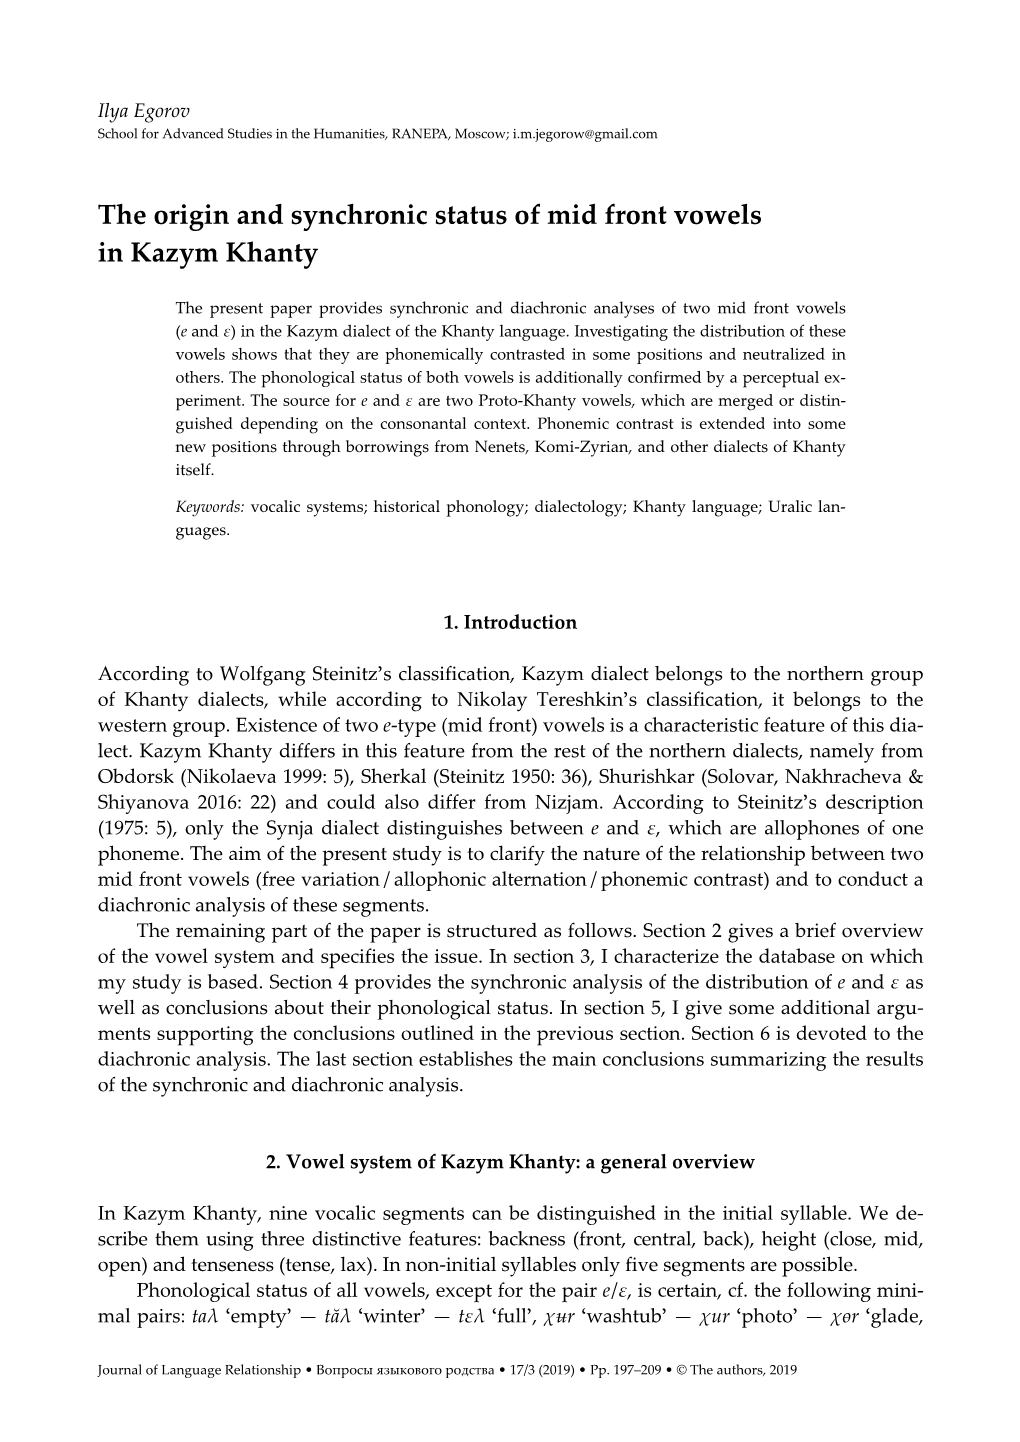 The Origin and Synchronic Status of Mid Front Vowels in Kazym Khanty